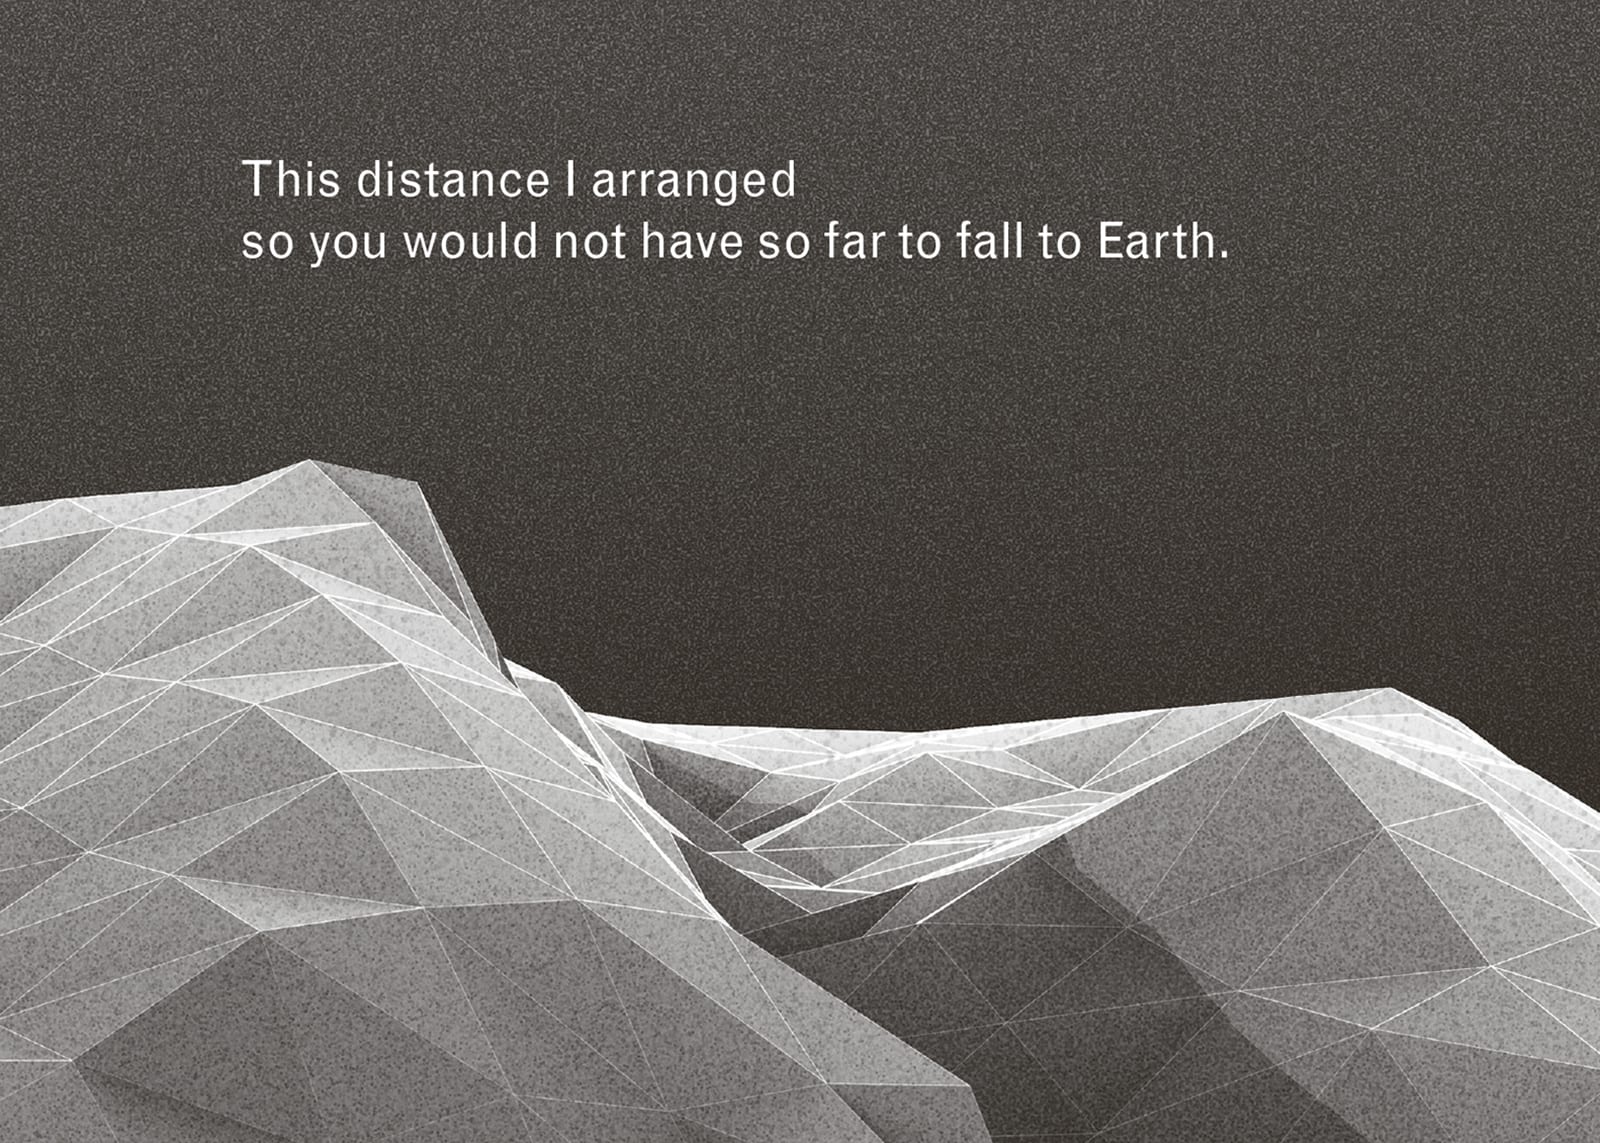 Detail of a book spread from Imaginary Explosions, page 35. Above black-and-white graphic of mountain topography, text reads, “This distance I arranged so you would not have so far to fall to Earth.”